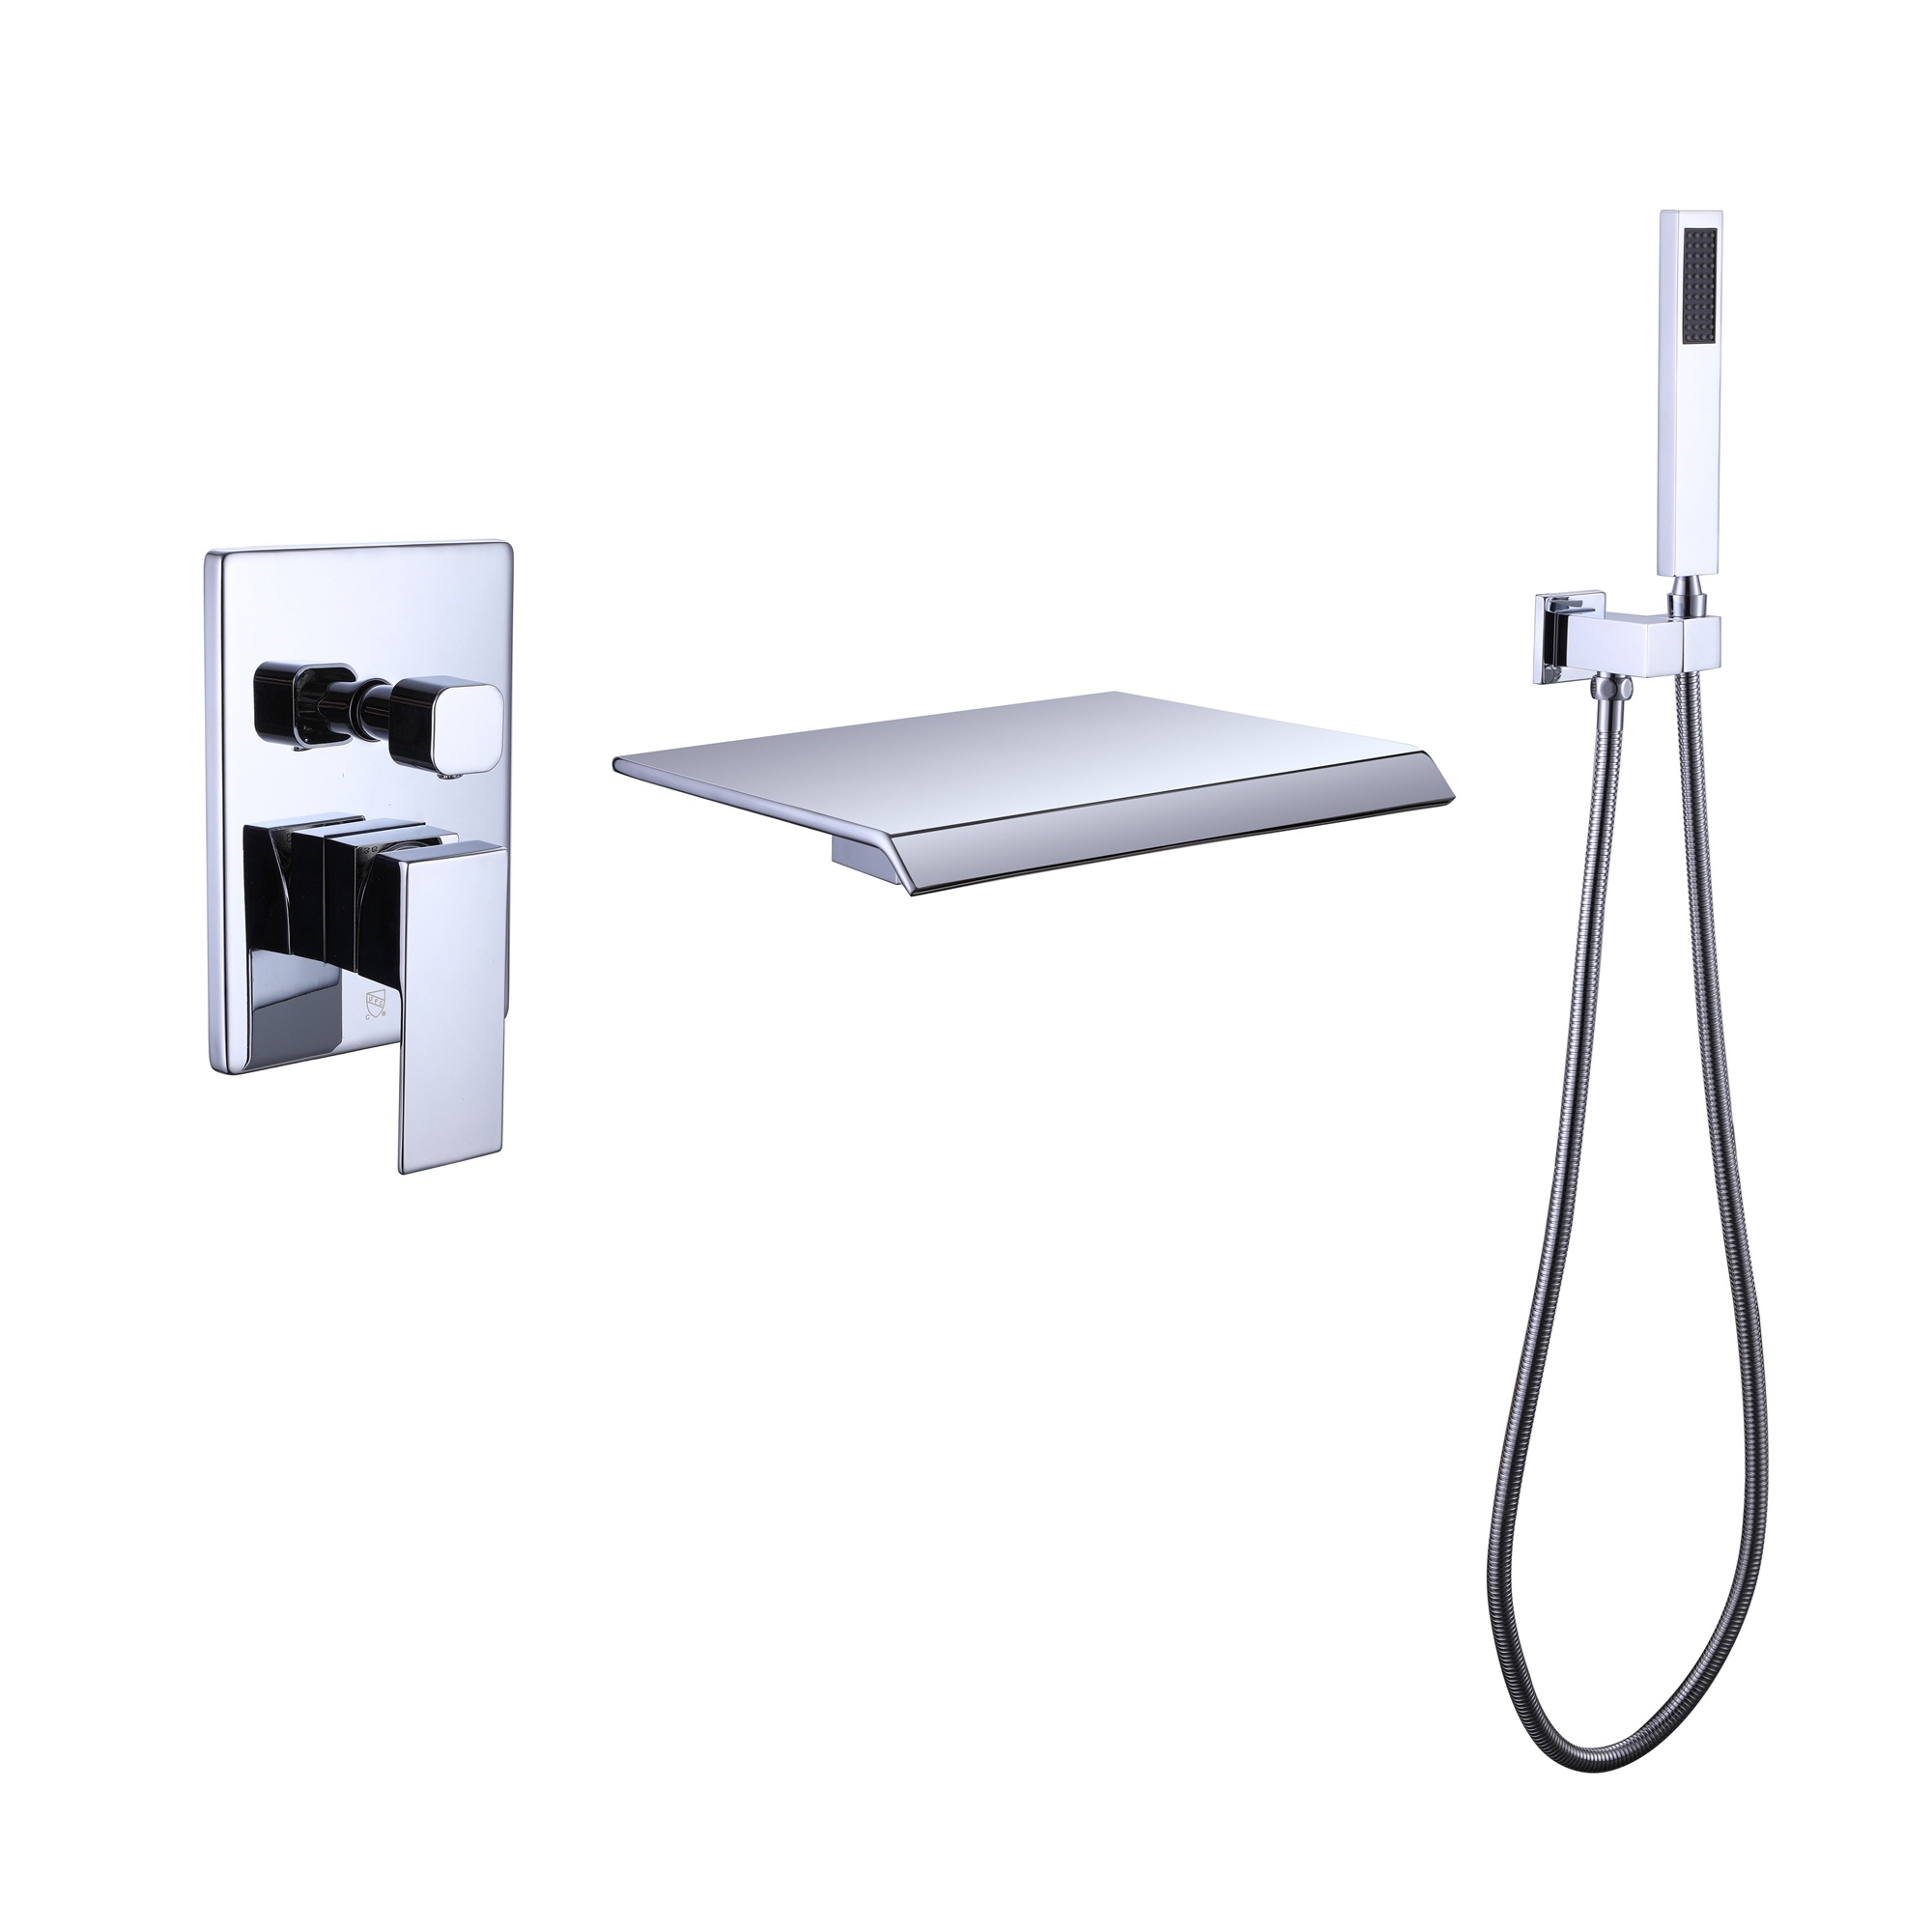 TrustMade Pressure-Balance Waterfall Single Handle Wall Mount Tub Faucet with Hand Shower, Chrome - 2W02-CASAINC